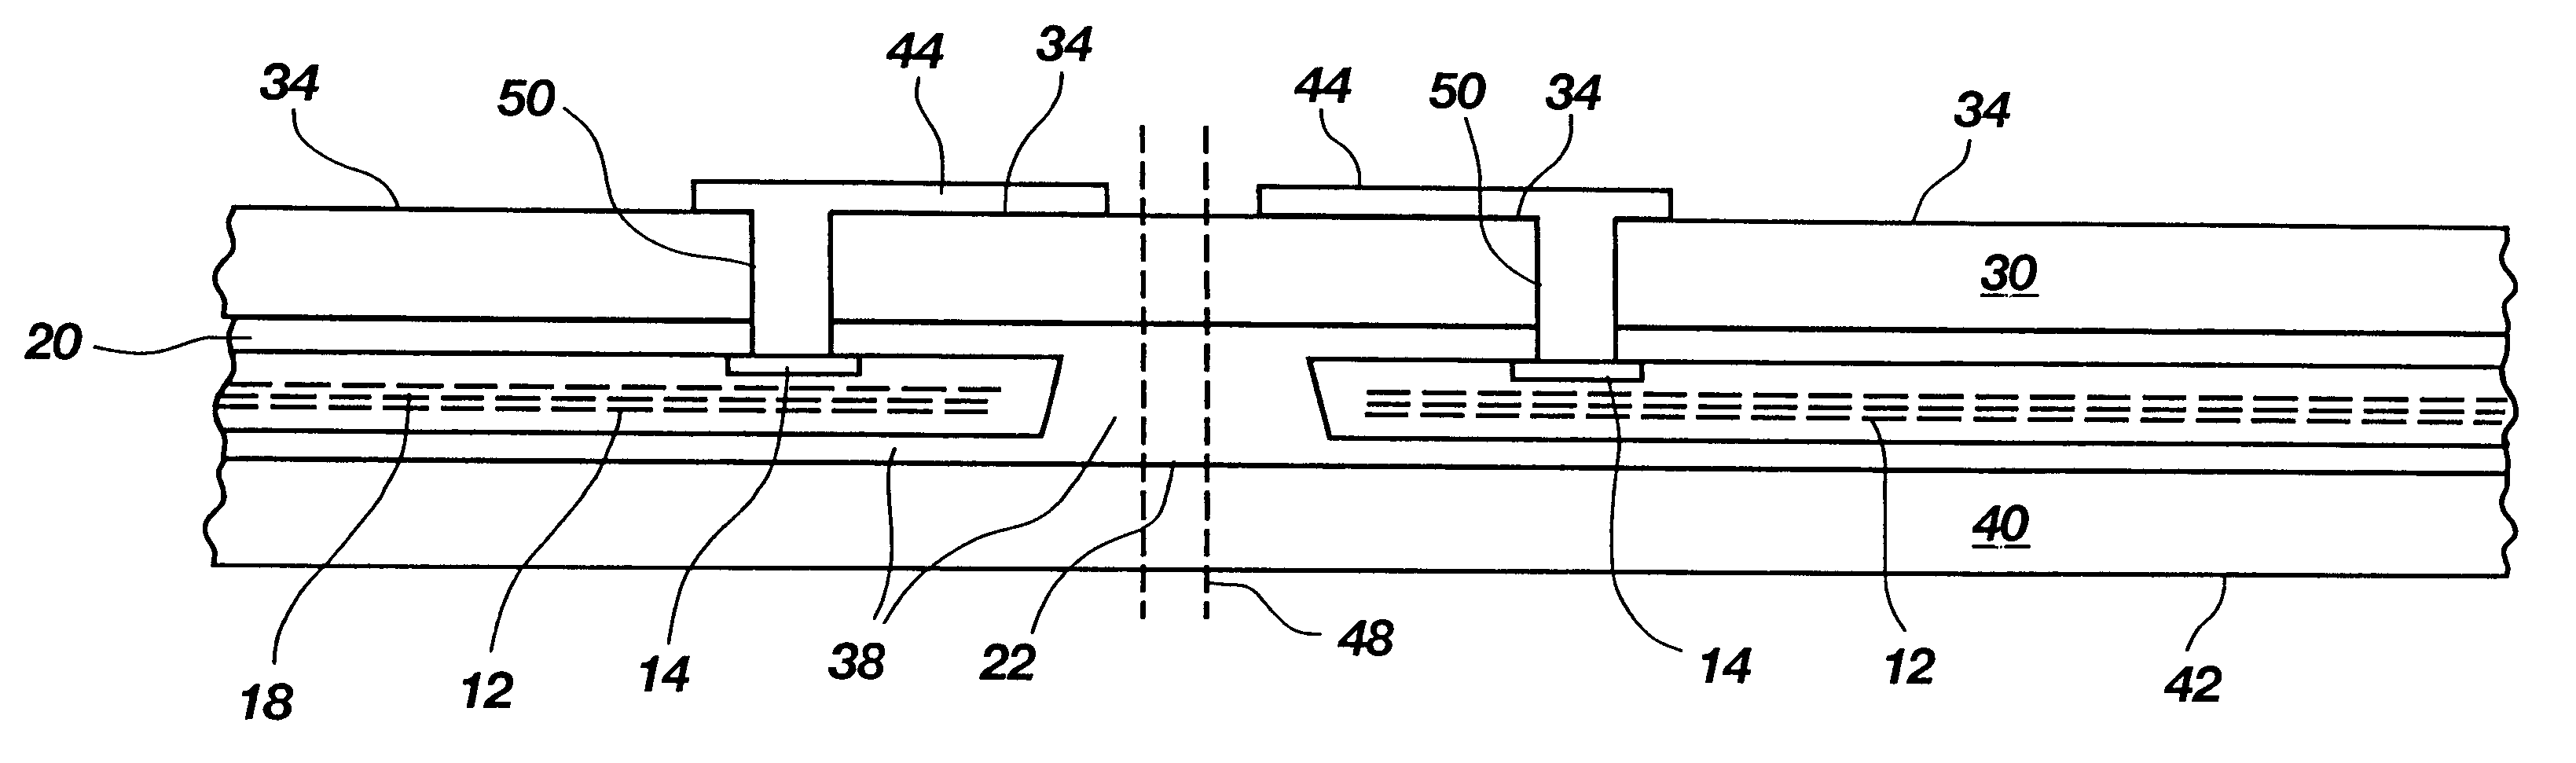 Wafer level fabrication and assembly of chip scale packages